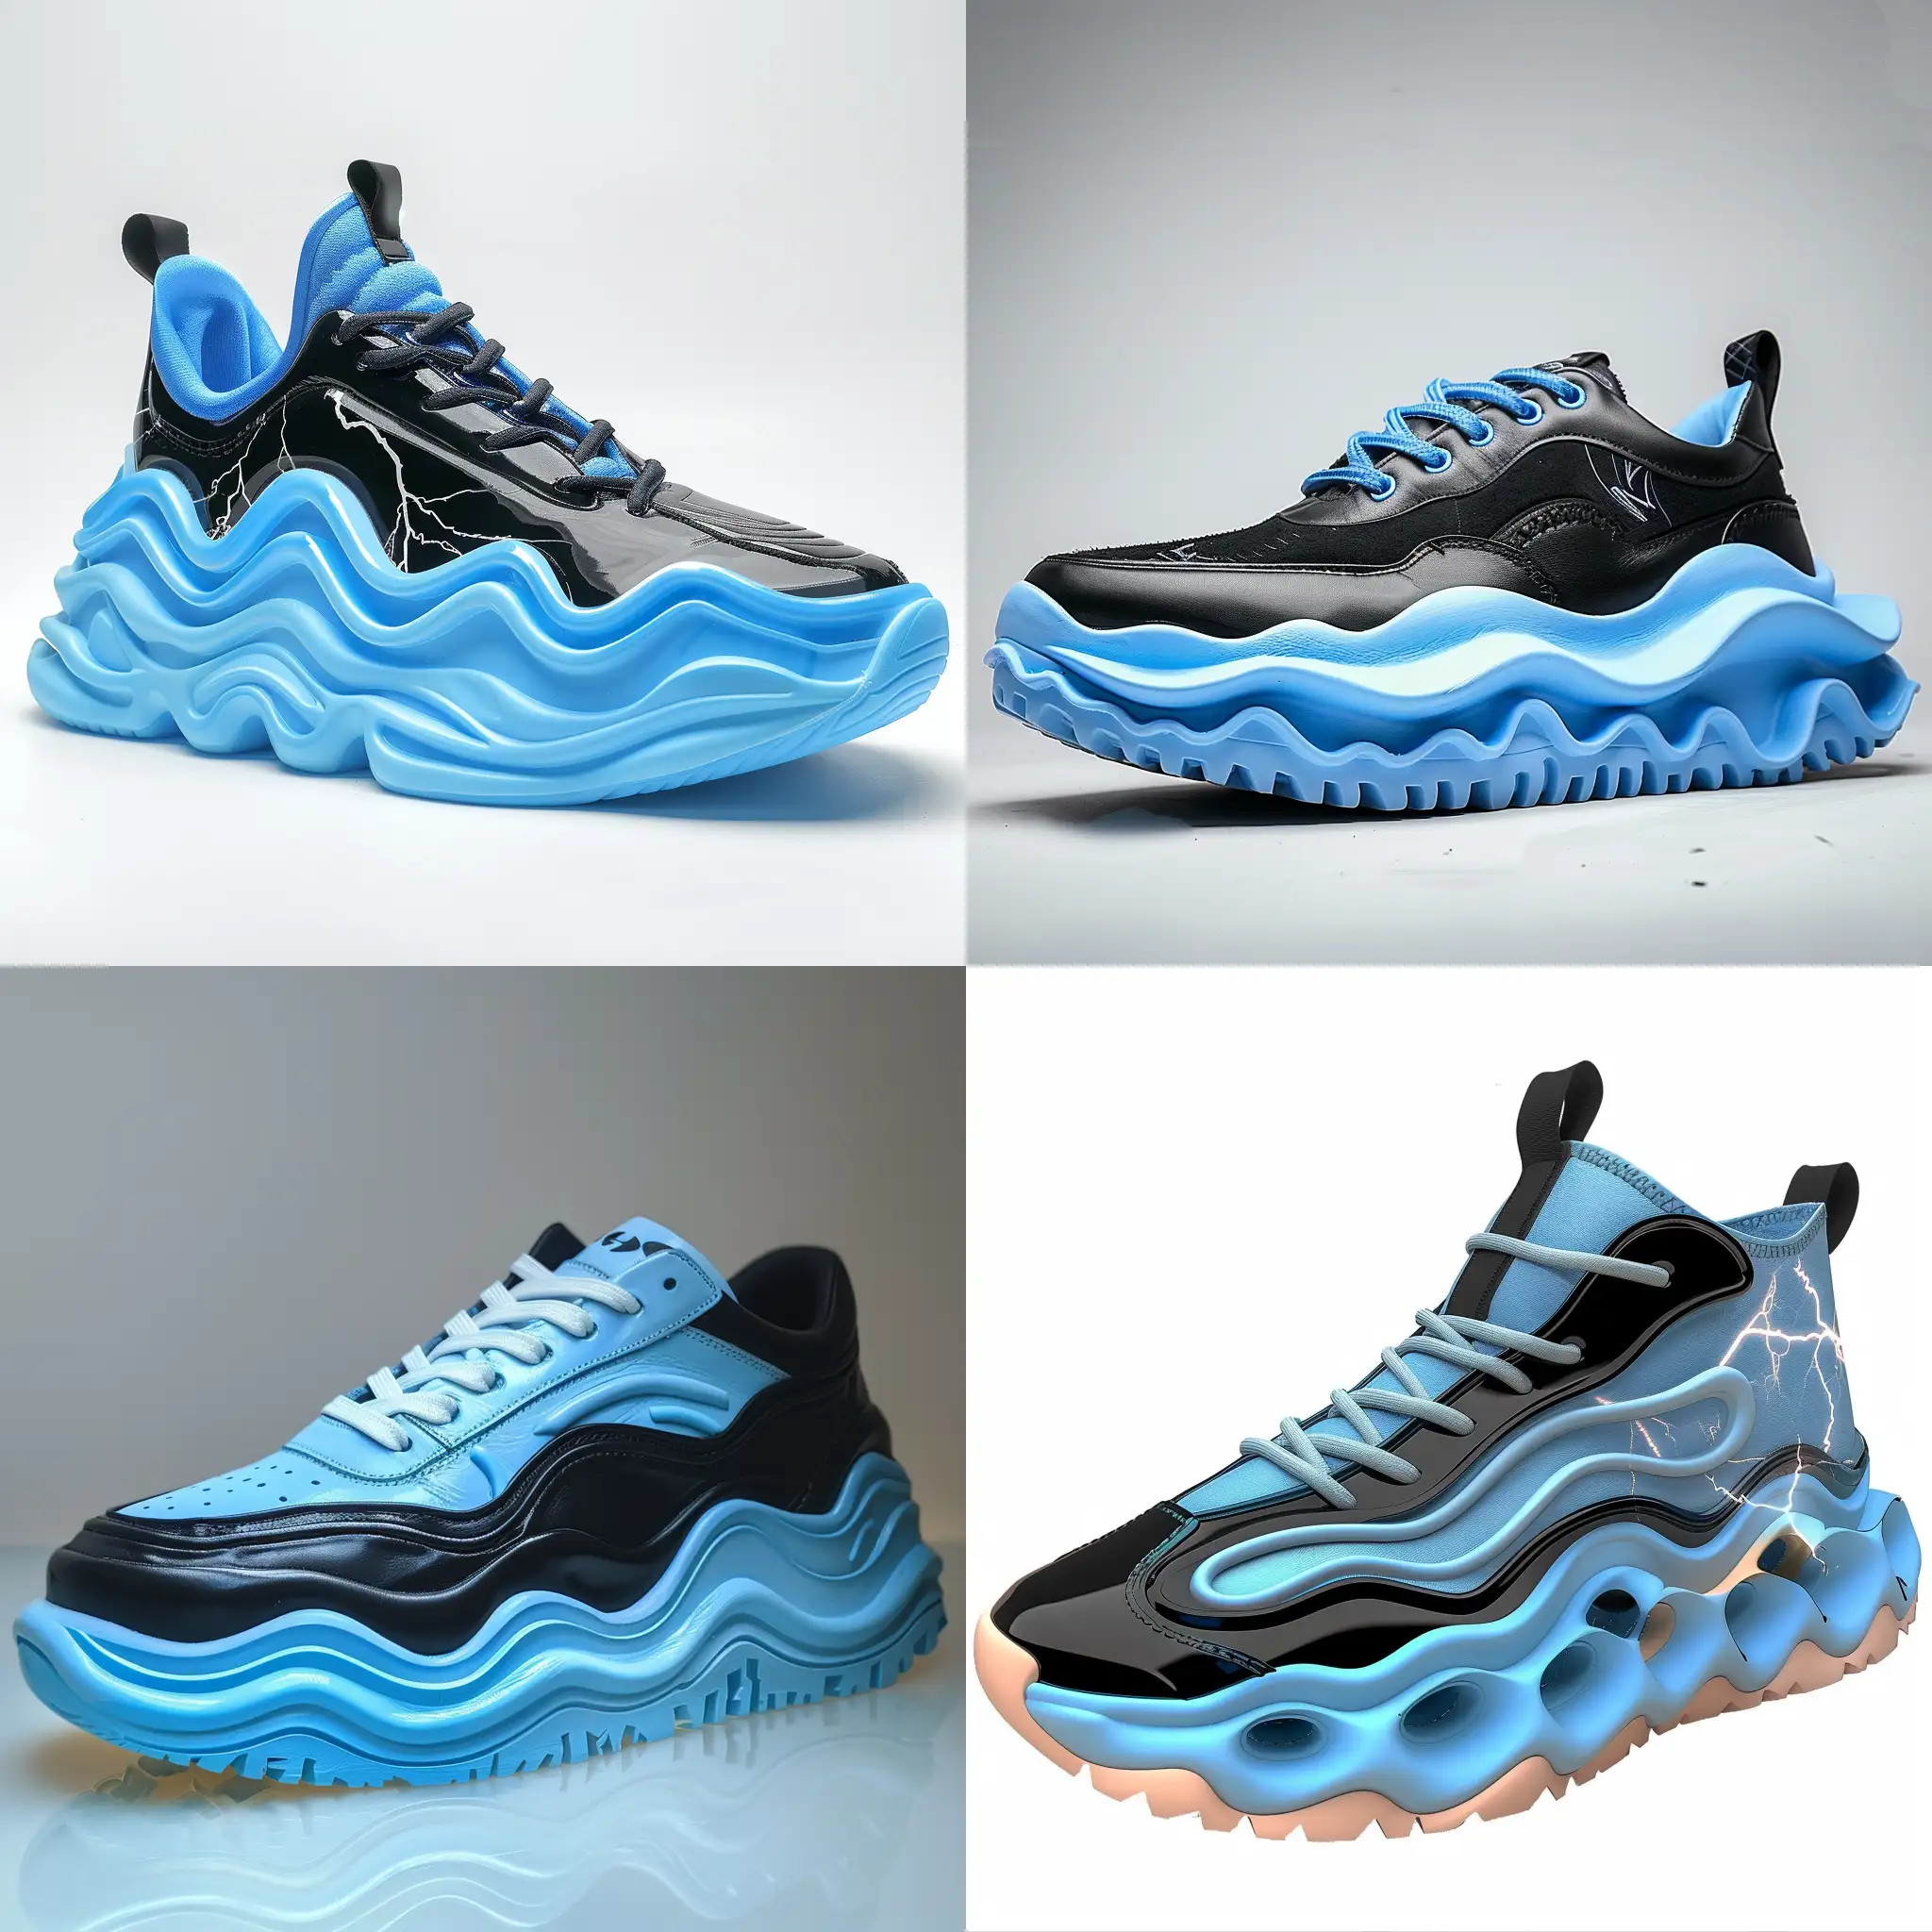 Do wavy sneakers trandy inspired by lightning Color black and blue and light blue Rubber outsole , leather upper , do some lightning drawing , outsole inspired by lightning